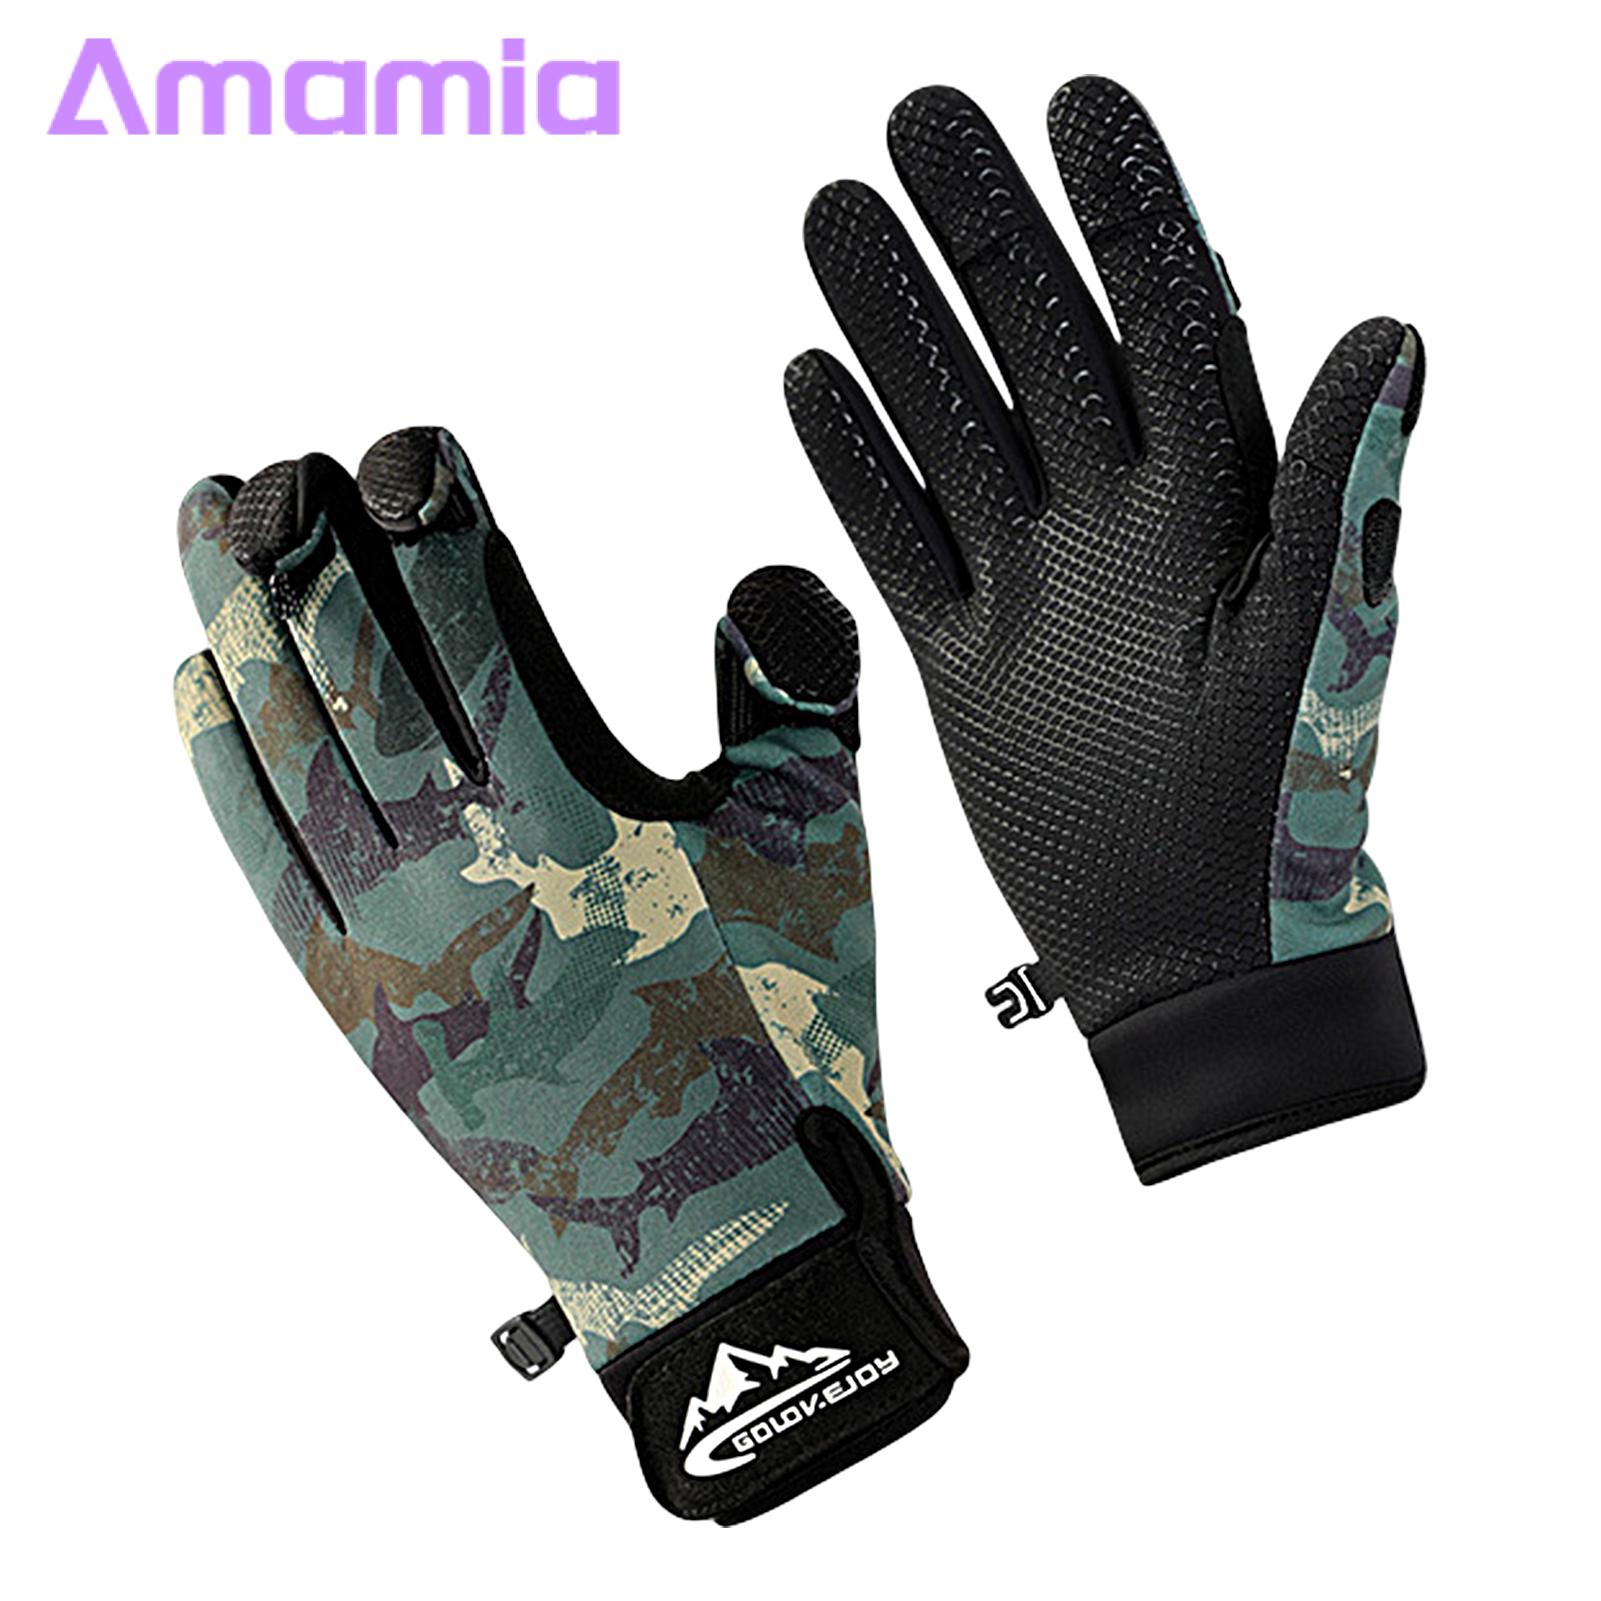 Amamia Fishing Gloves Full Finger Windproof Winter Unisex Skiing Angling  Gloves